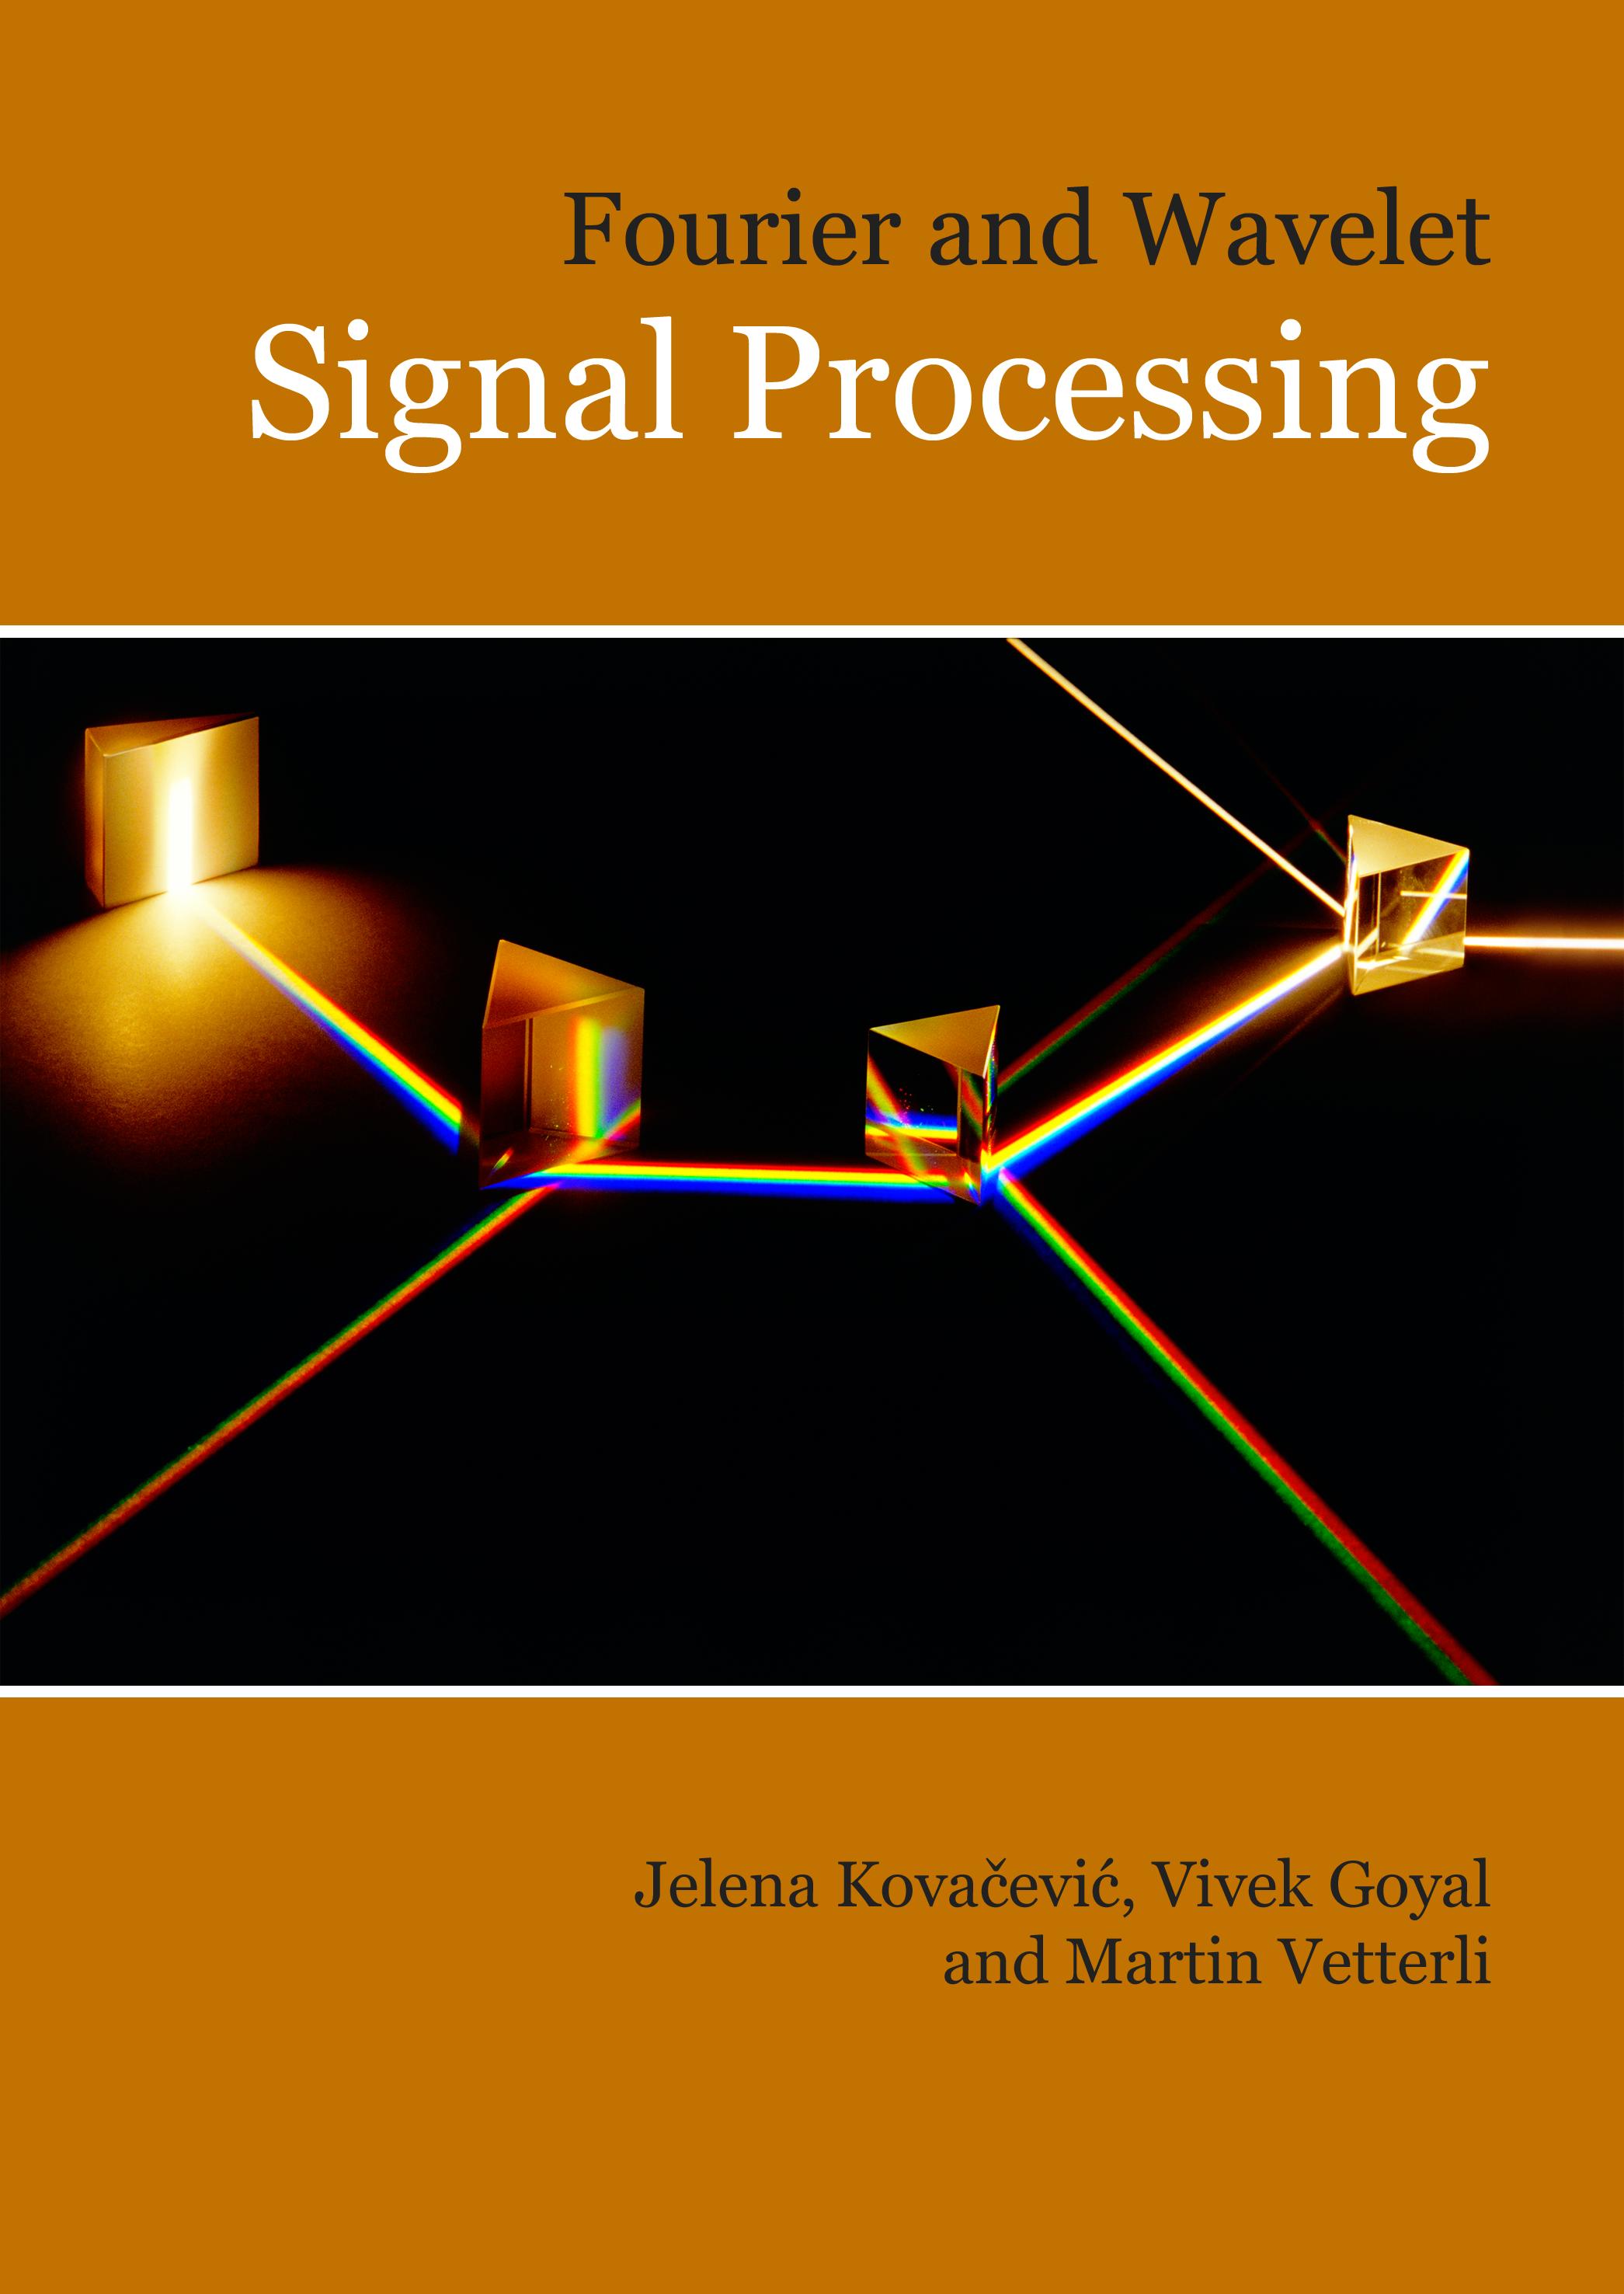 Fourier and Wavelet Signal Processing by Kovacevic, Goyal, and Vetterli